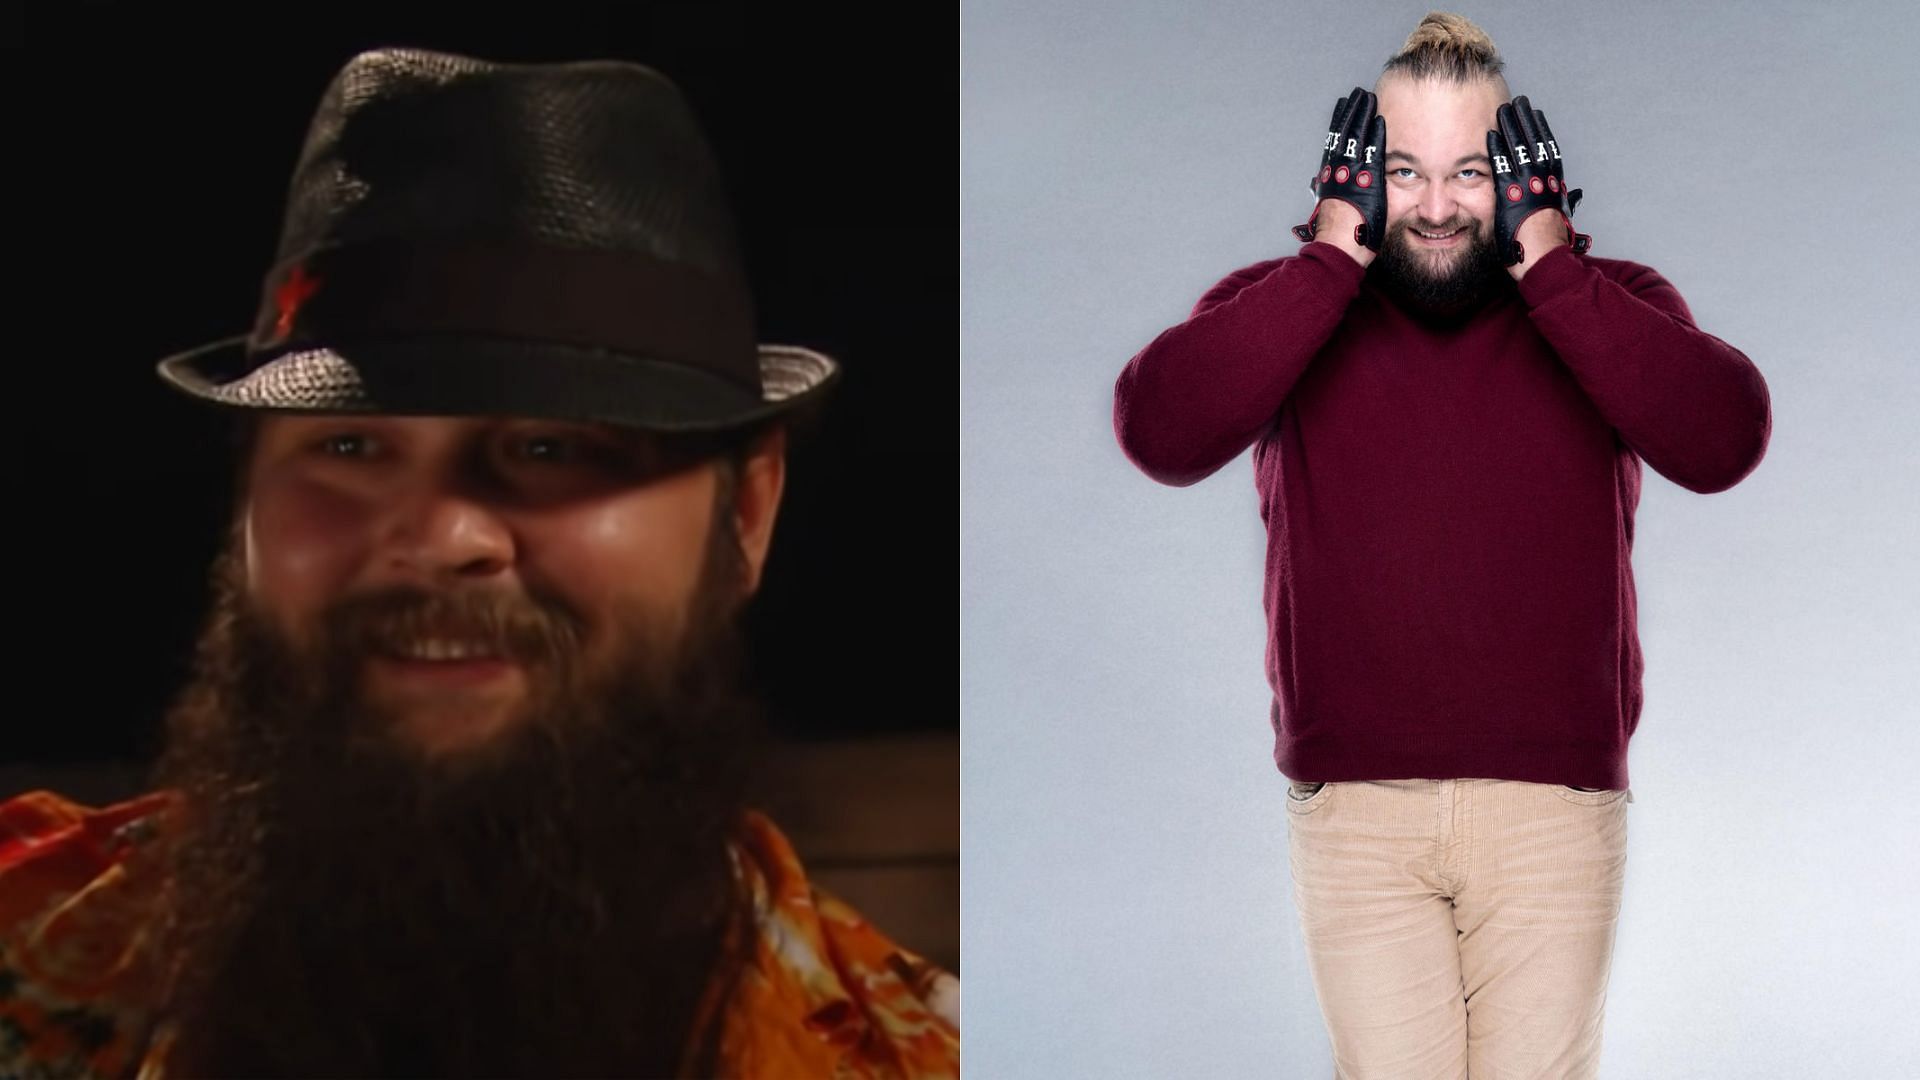 Bray Wyatt returned to WWE at Extreme Rules.